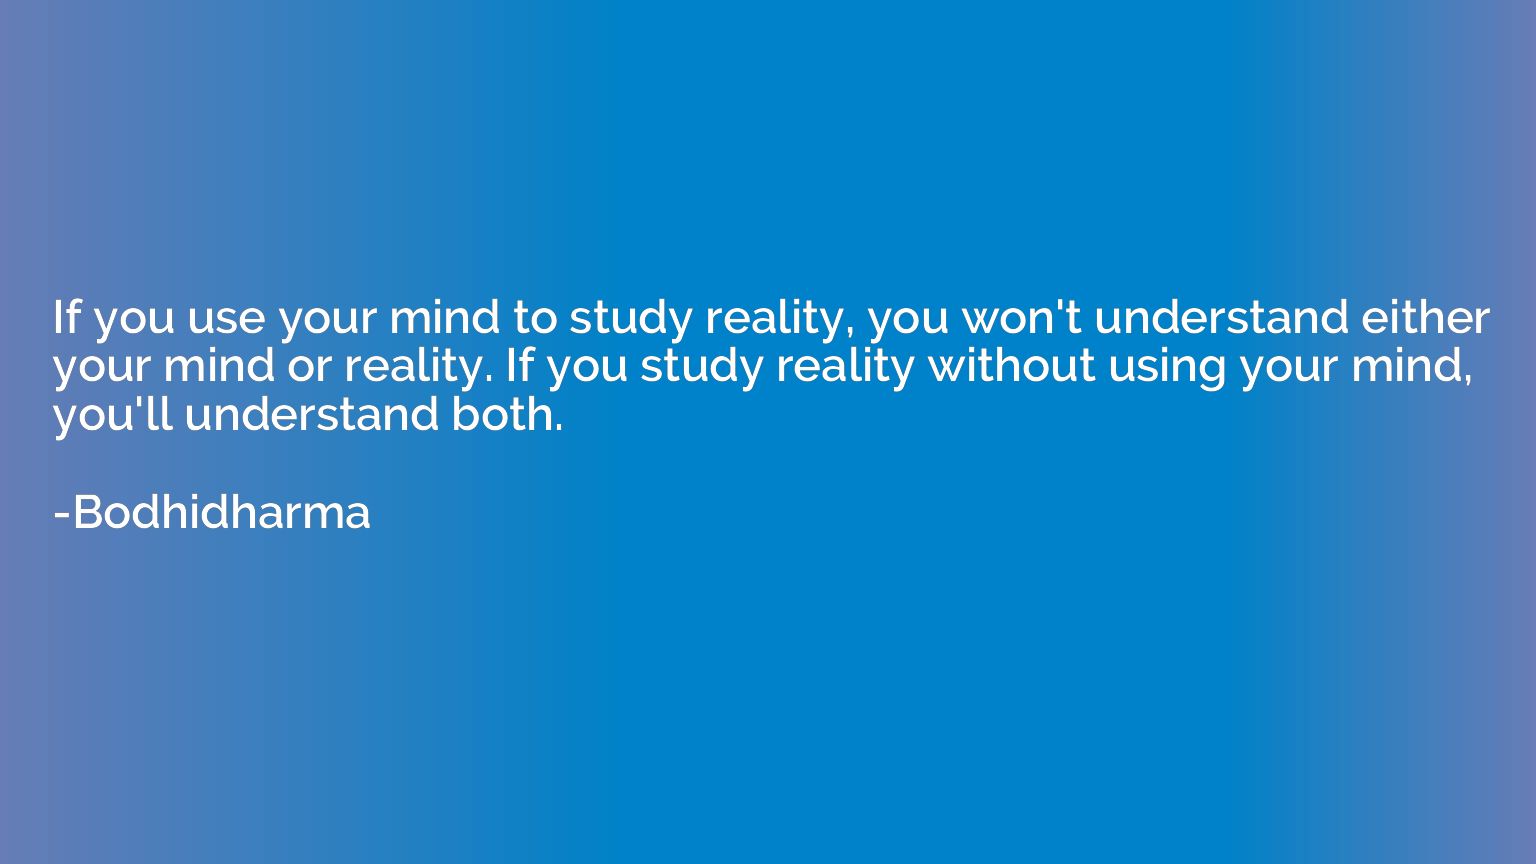 If you use your mind to study reality, you won't understand 